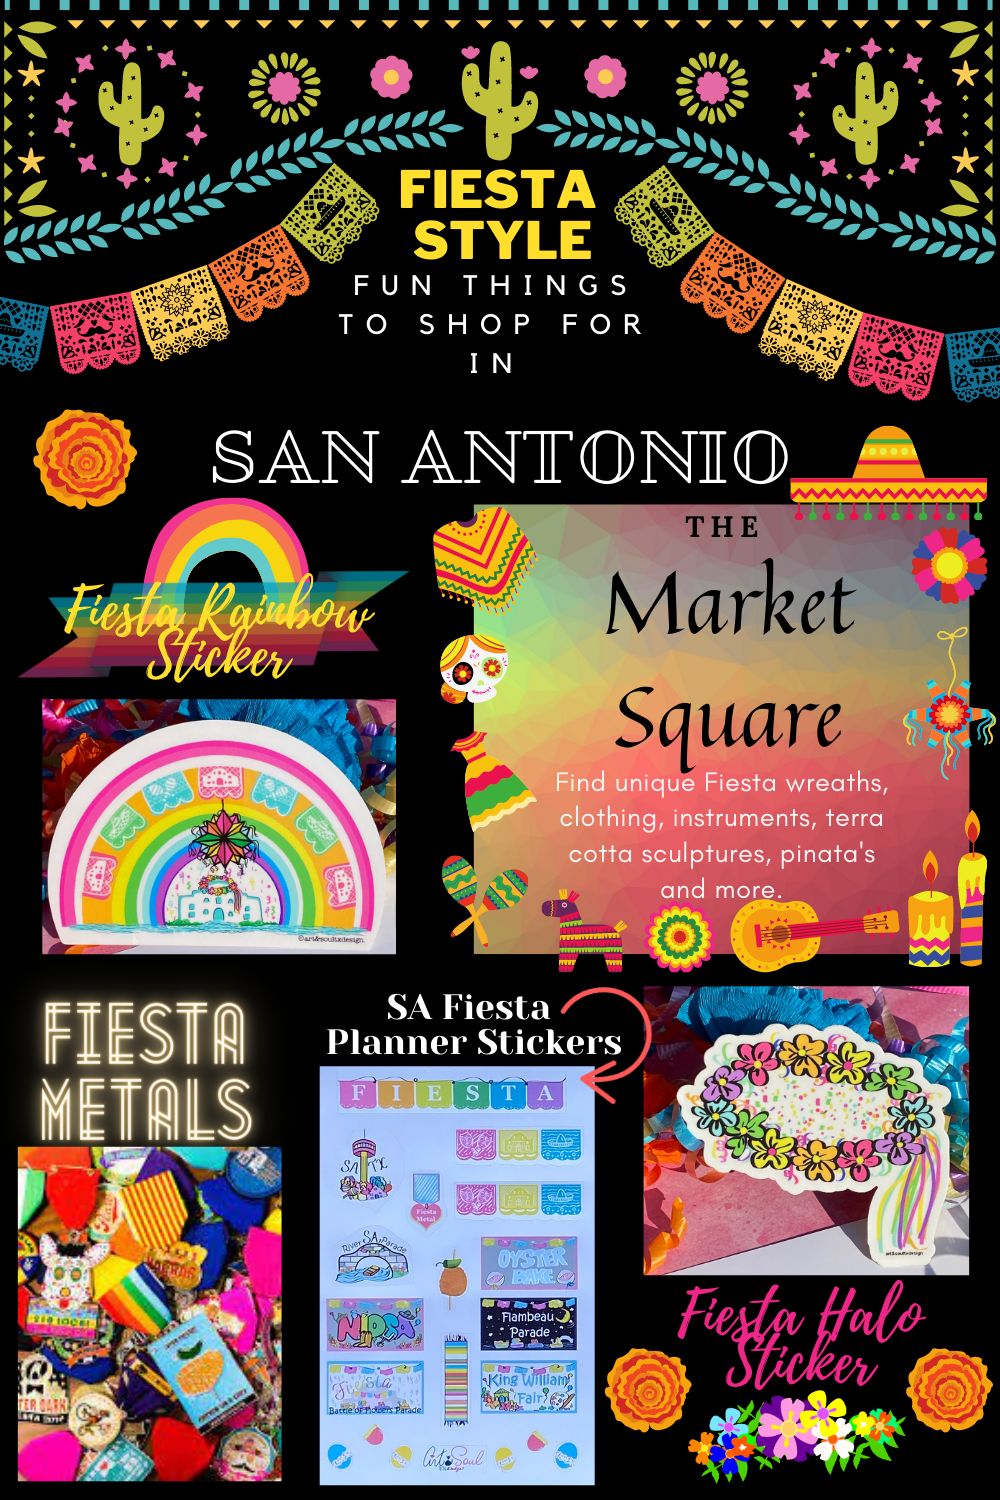 Fun Things to Shop For During Fiesta